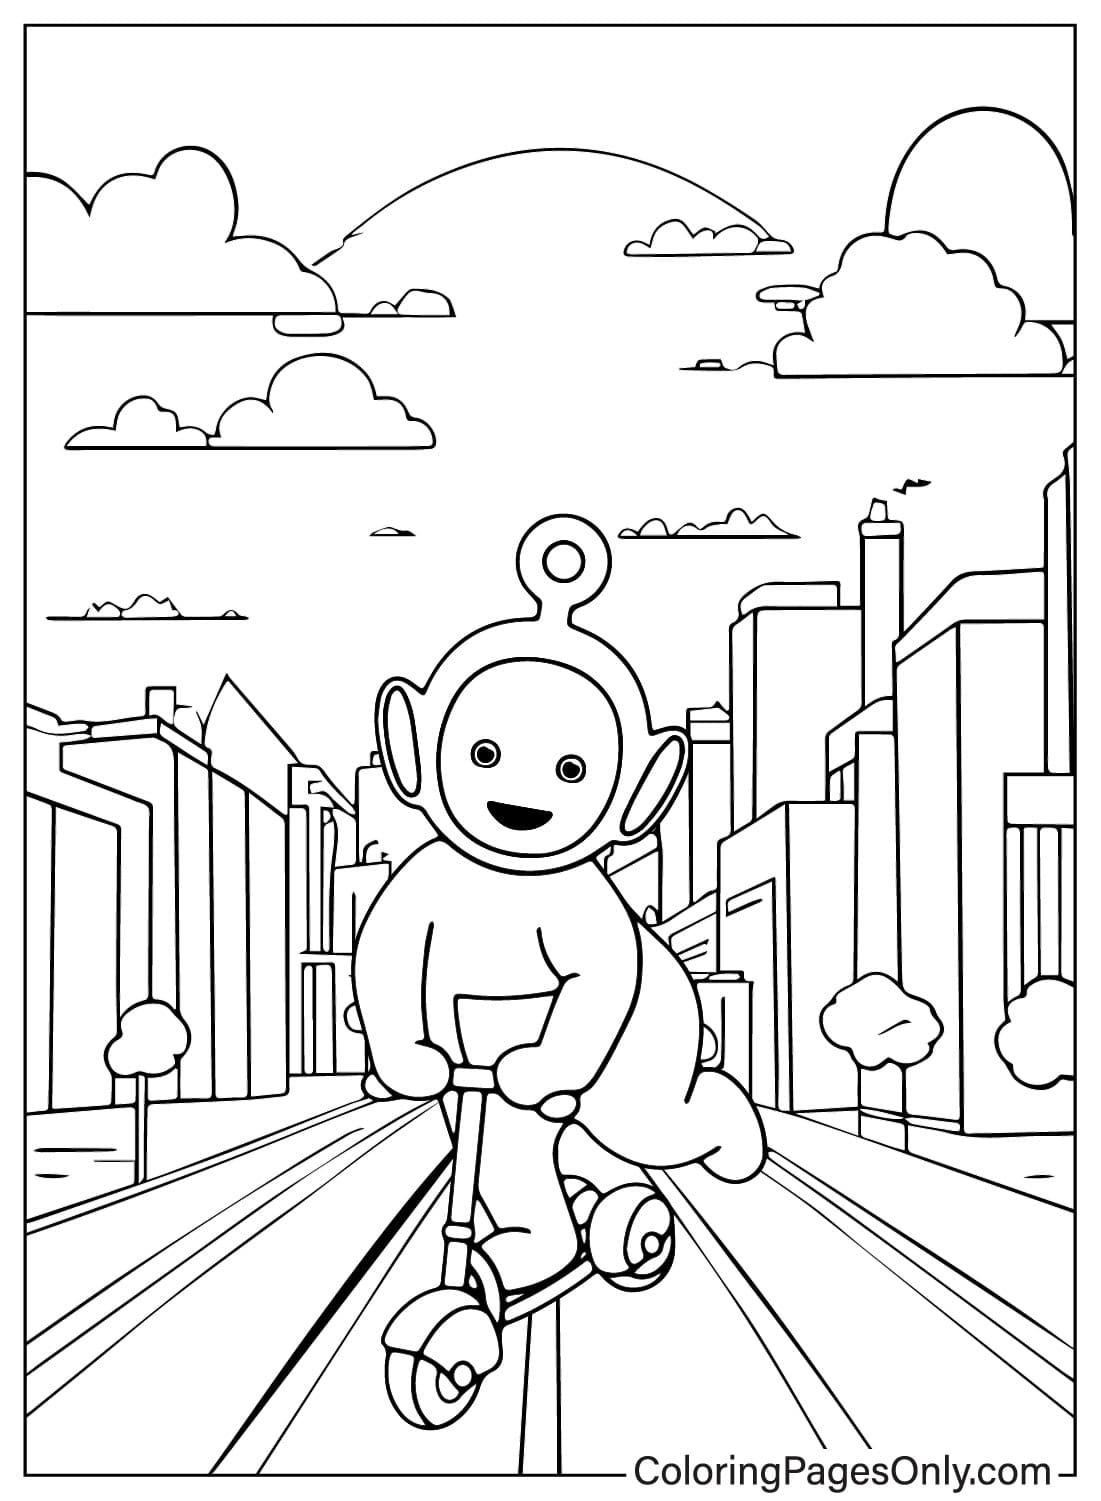 Coloring Page Free Po from Teletubbies - WildBrain